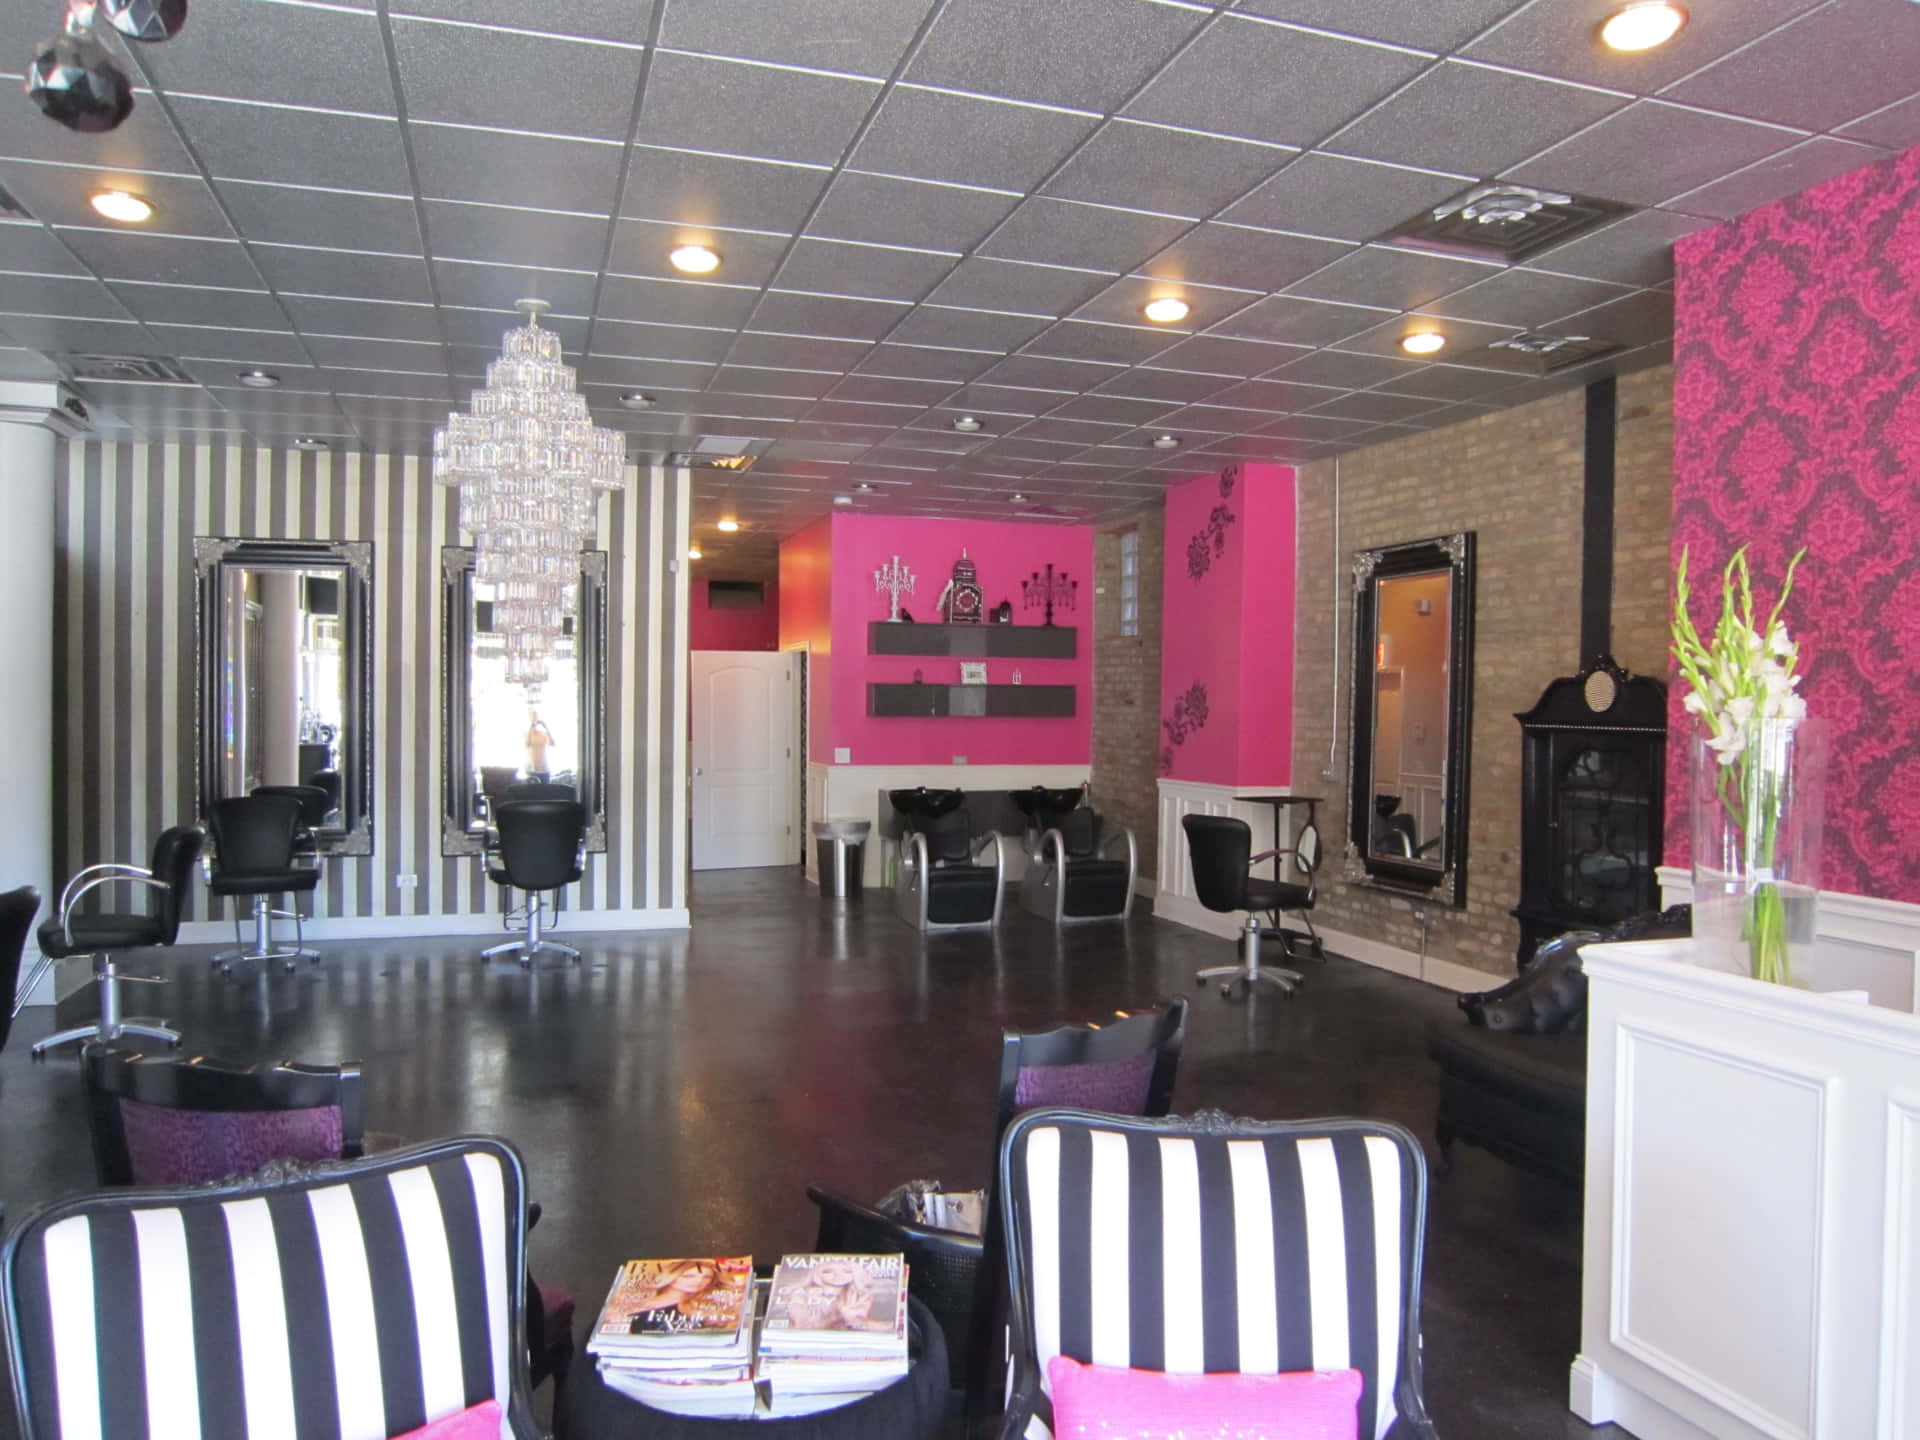 Get creative with your style! Visit our salon to try a look that works for you.